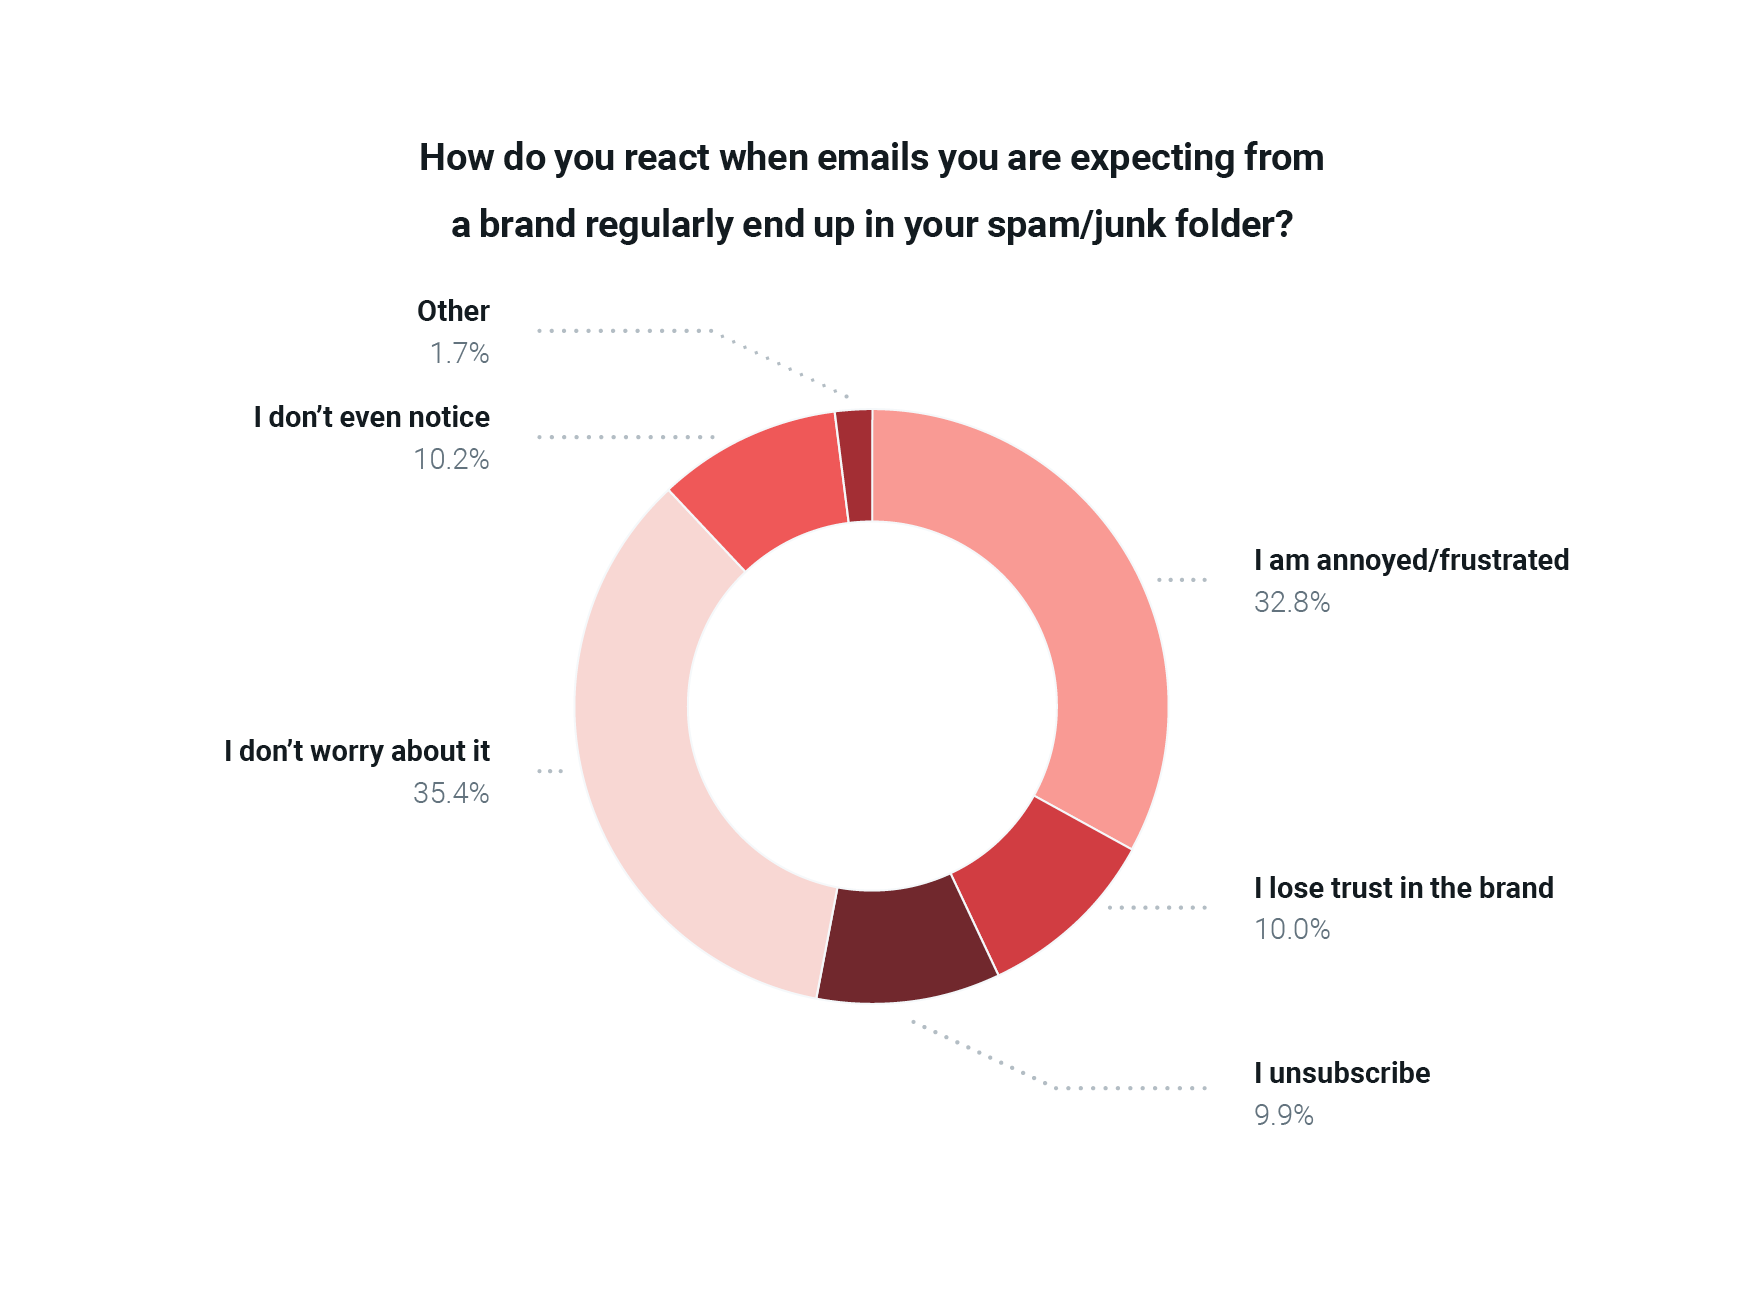 Graph showing 32.8% of those surveyed would be frustrated by brand emails regularly landing in spam.